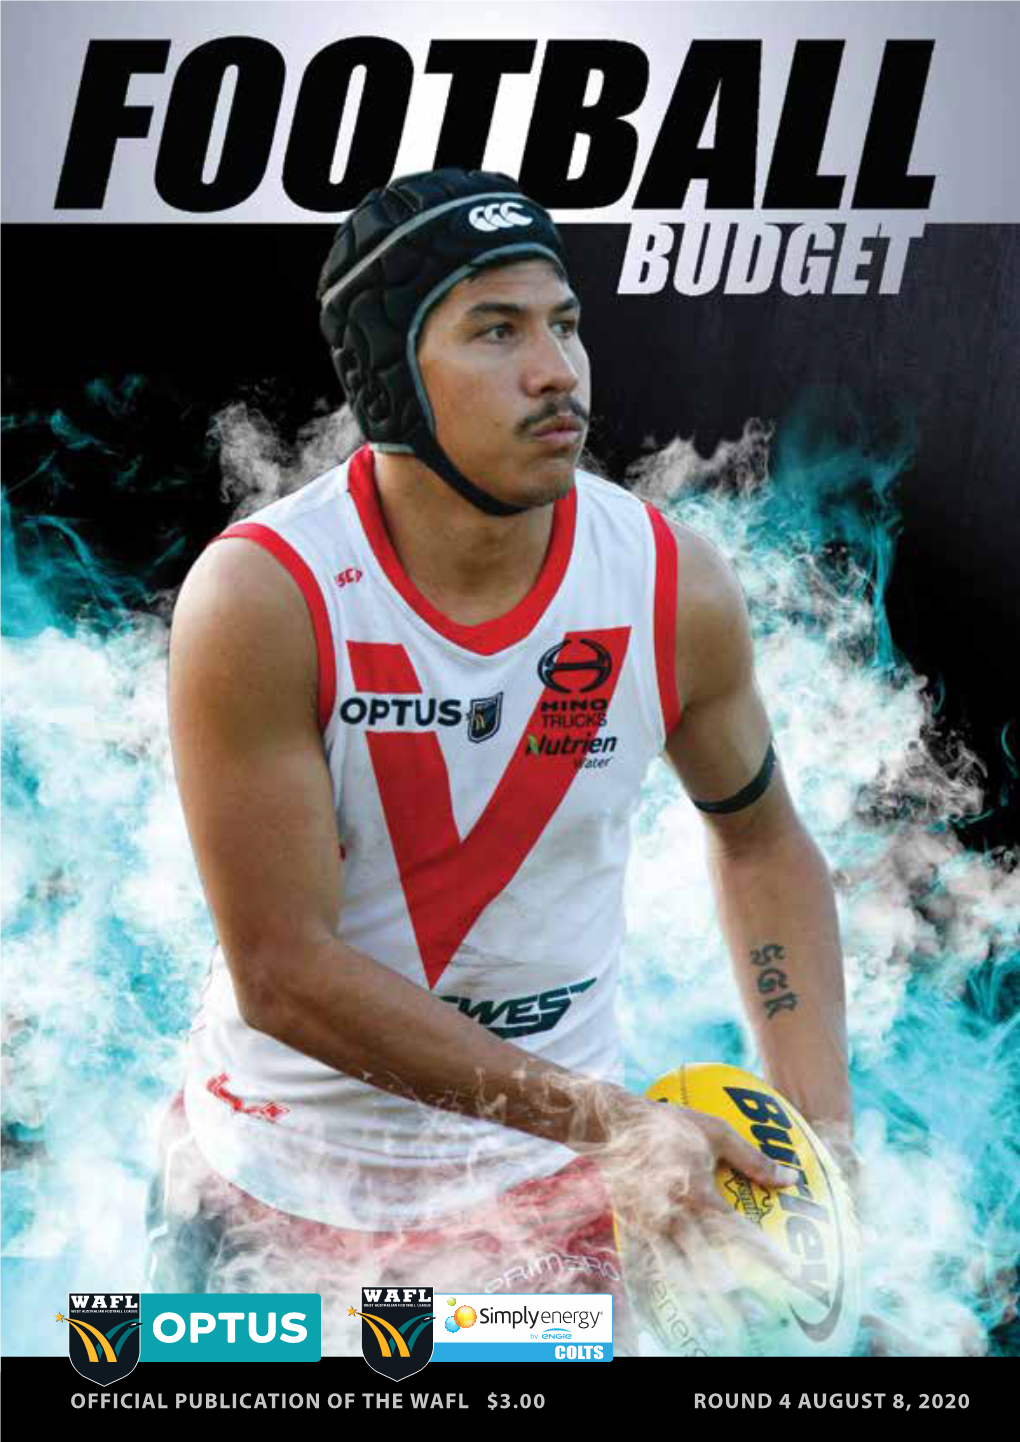 Round 4 August 8, 2020 Official Publication of the Wafl $3.00